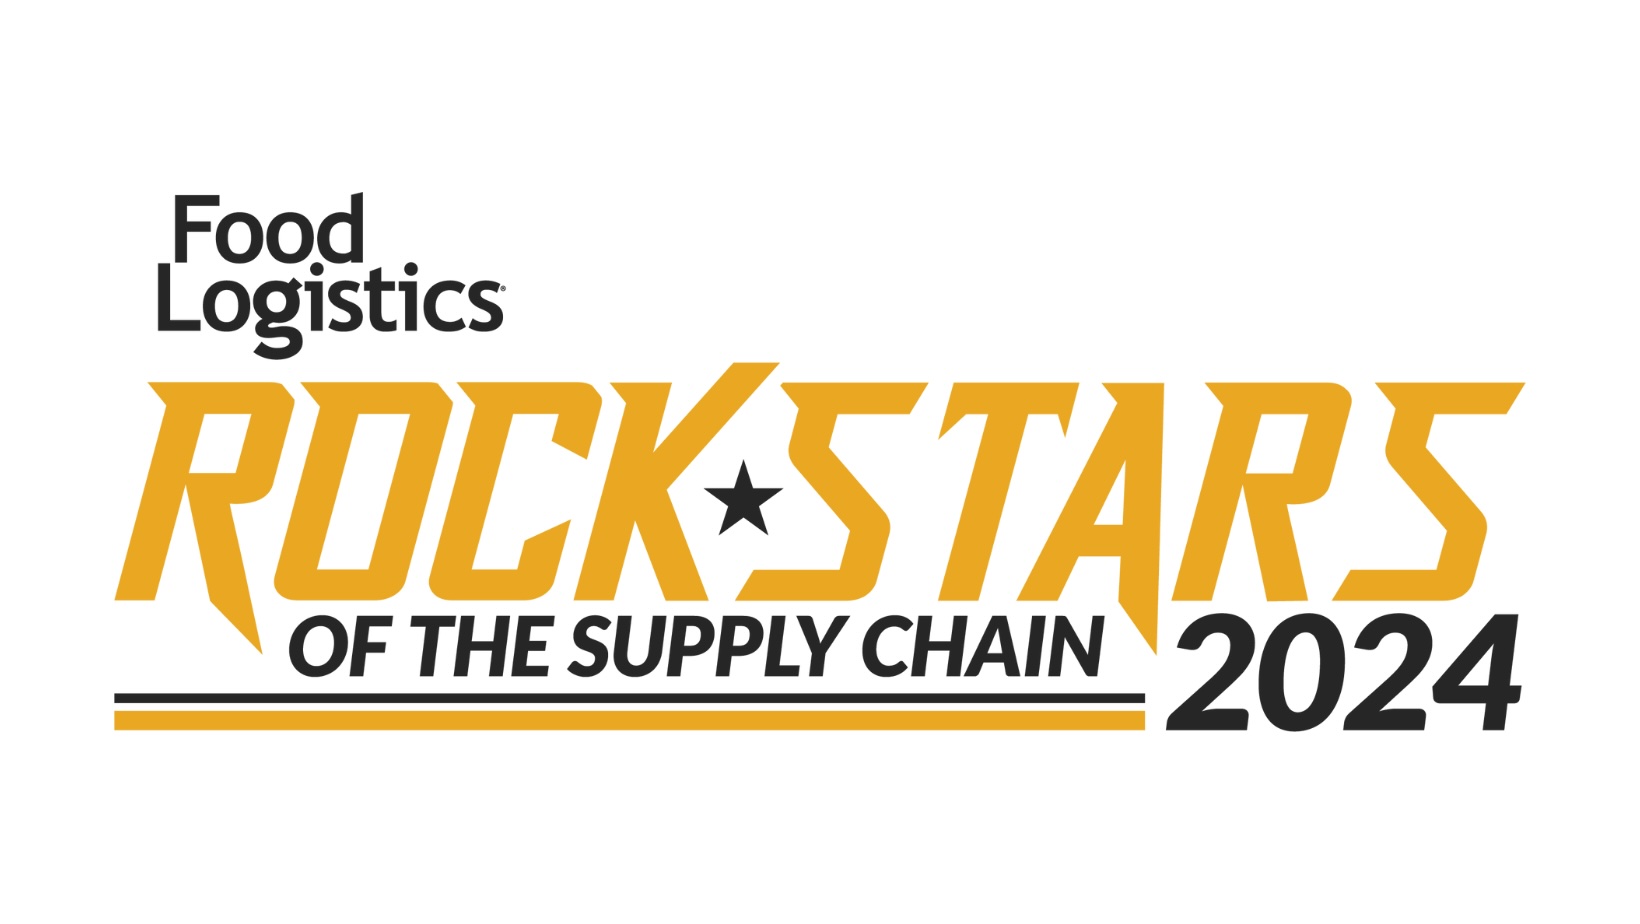 Nexterus President Named Food Logistics 2024 Rock Star of the Supply Chain